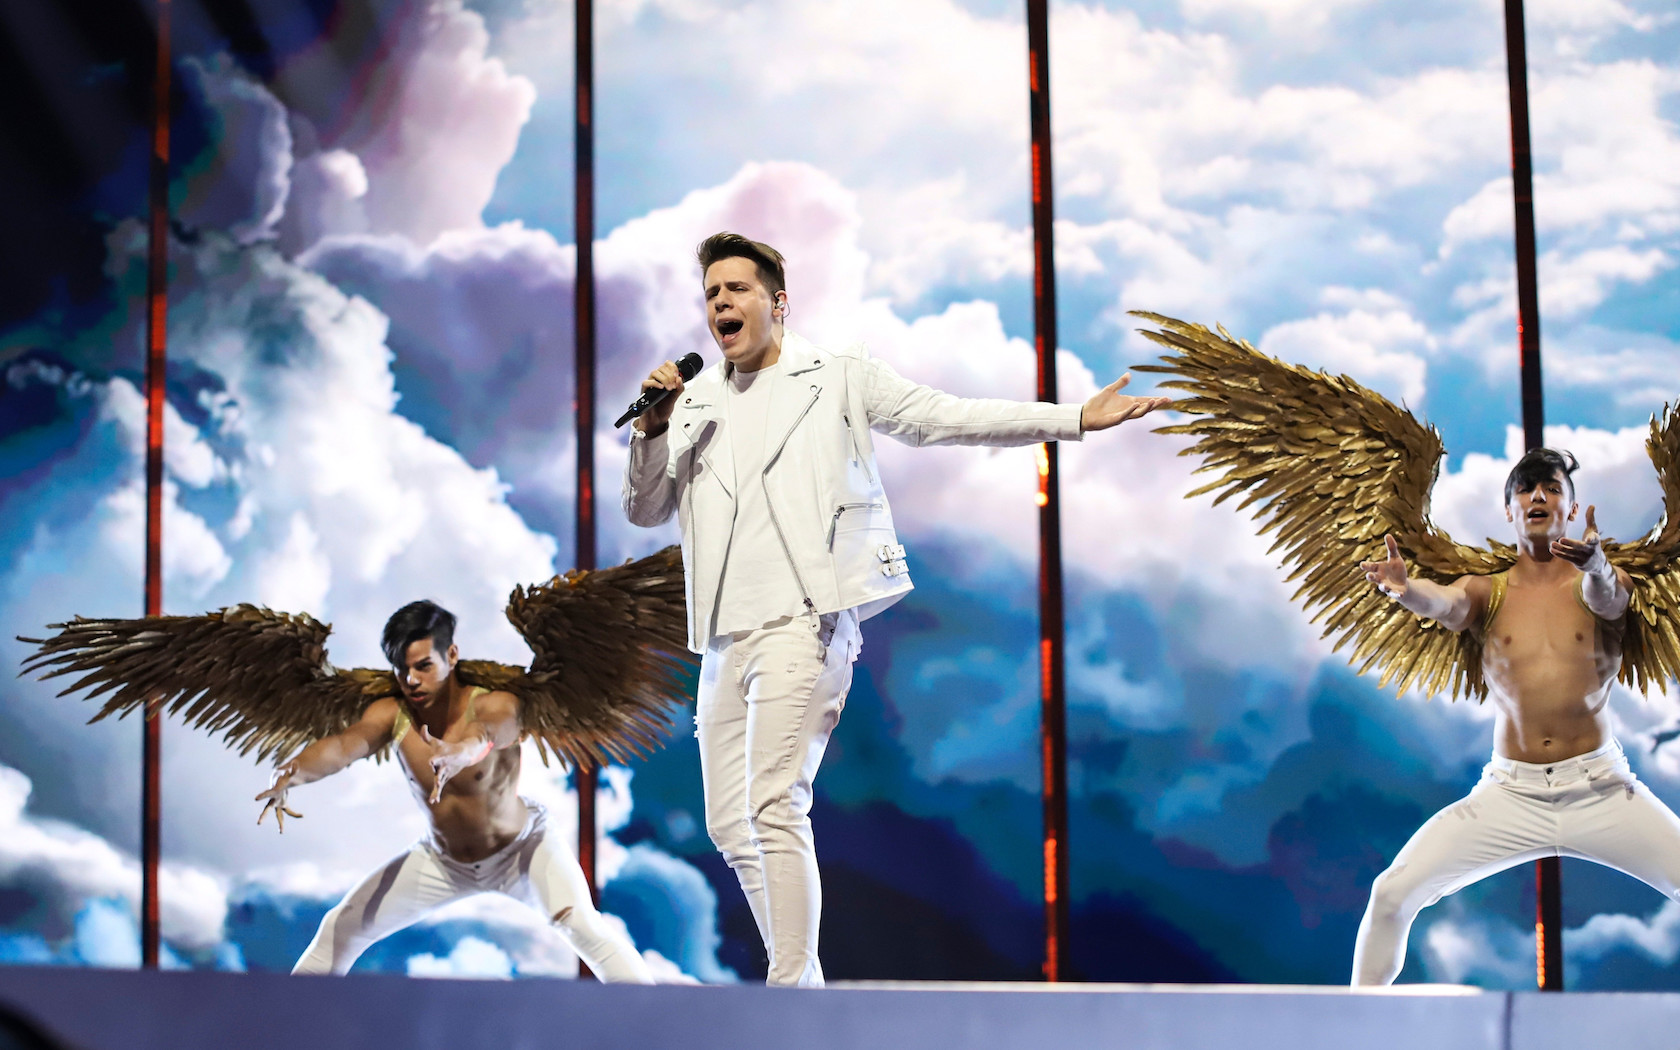 Eurovision 2019 Croatia Entry Roko rehearses before the main event of the Eurovision Song Contest 2019